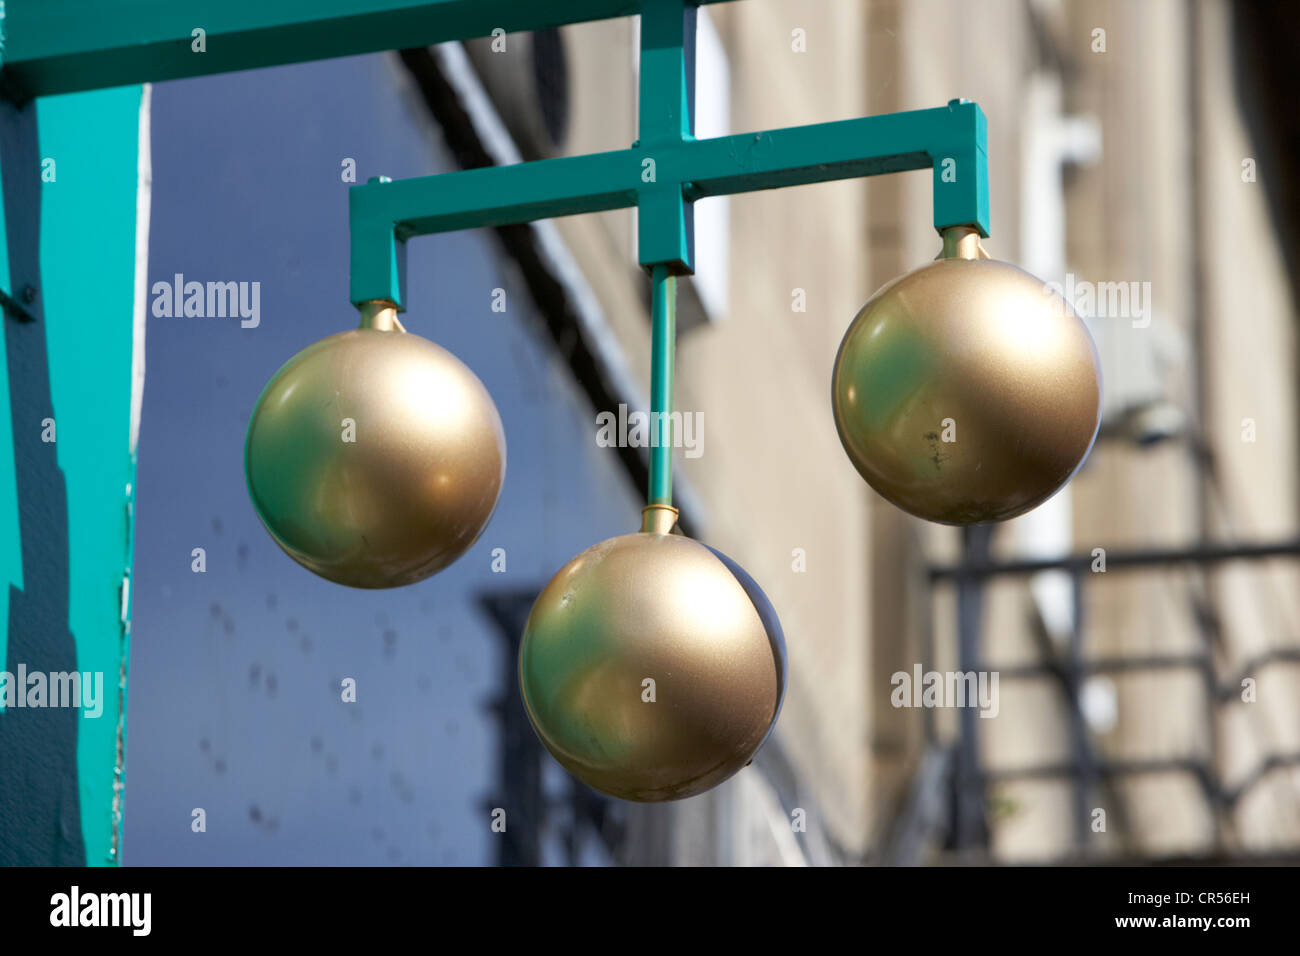 three golden balls pawnbroker symbol outside a pawn shop in the uk Stock Photo